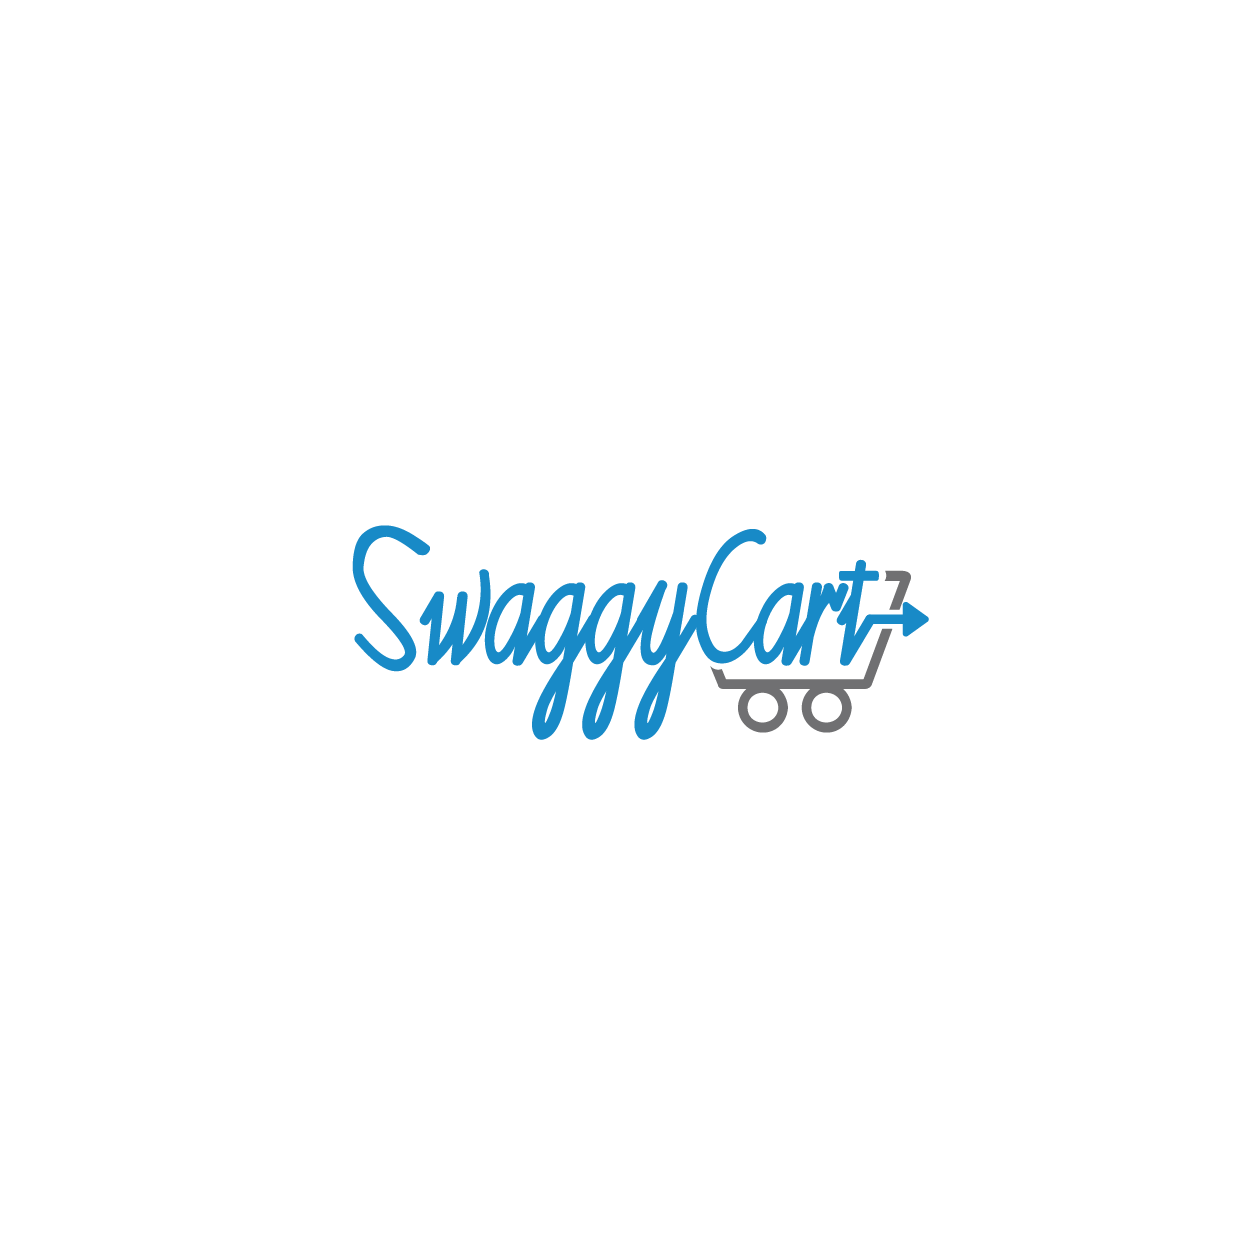 swaggycart-01.png